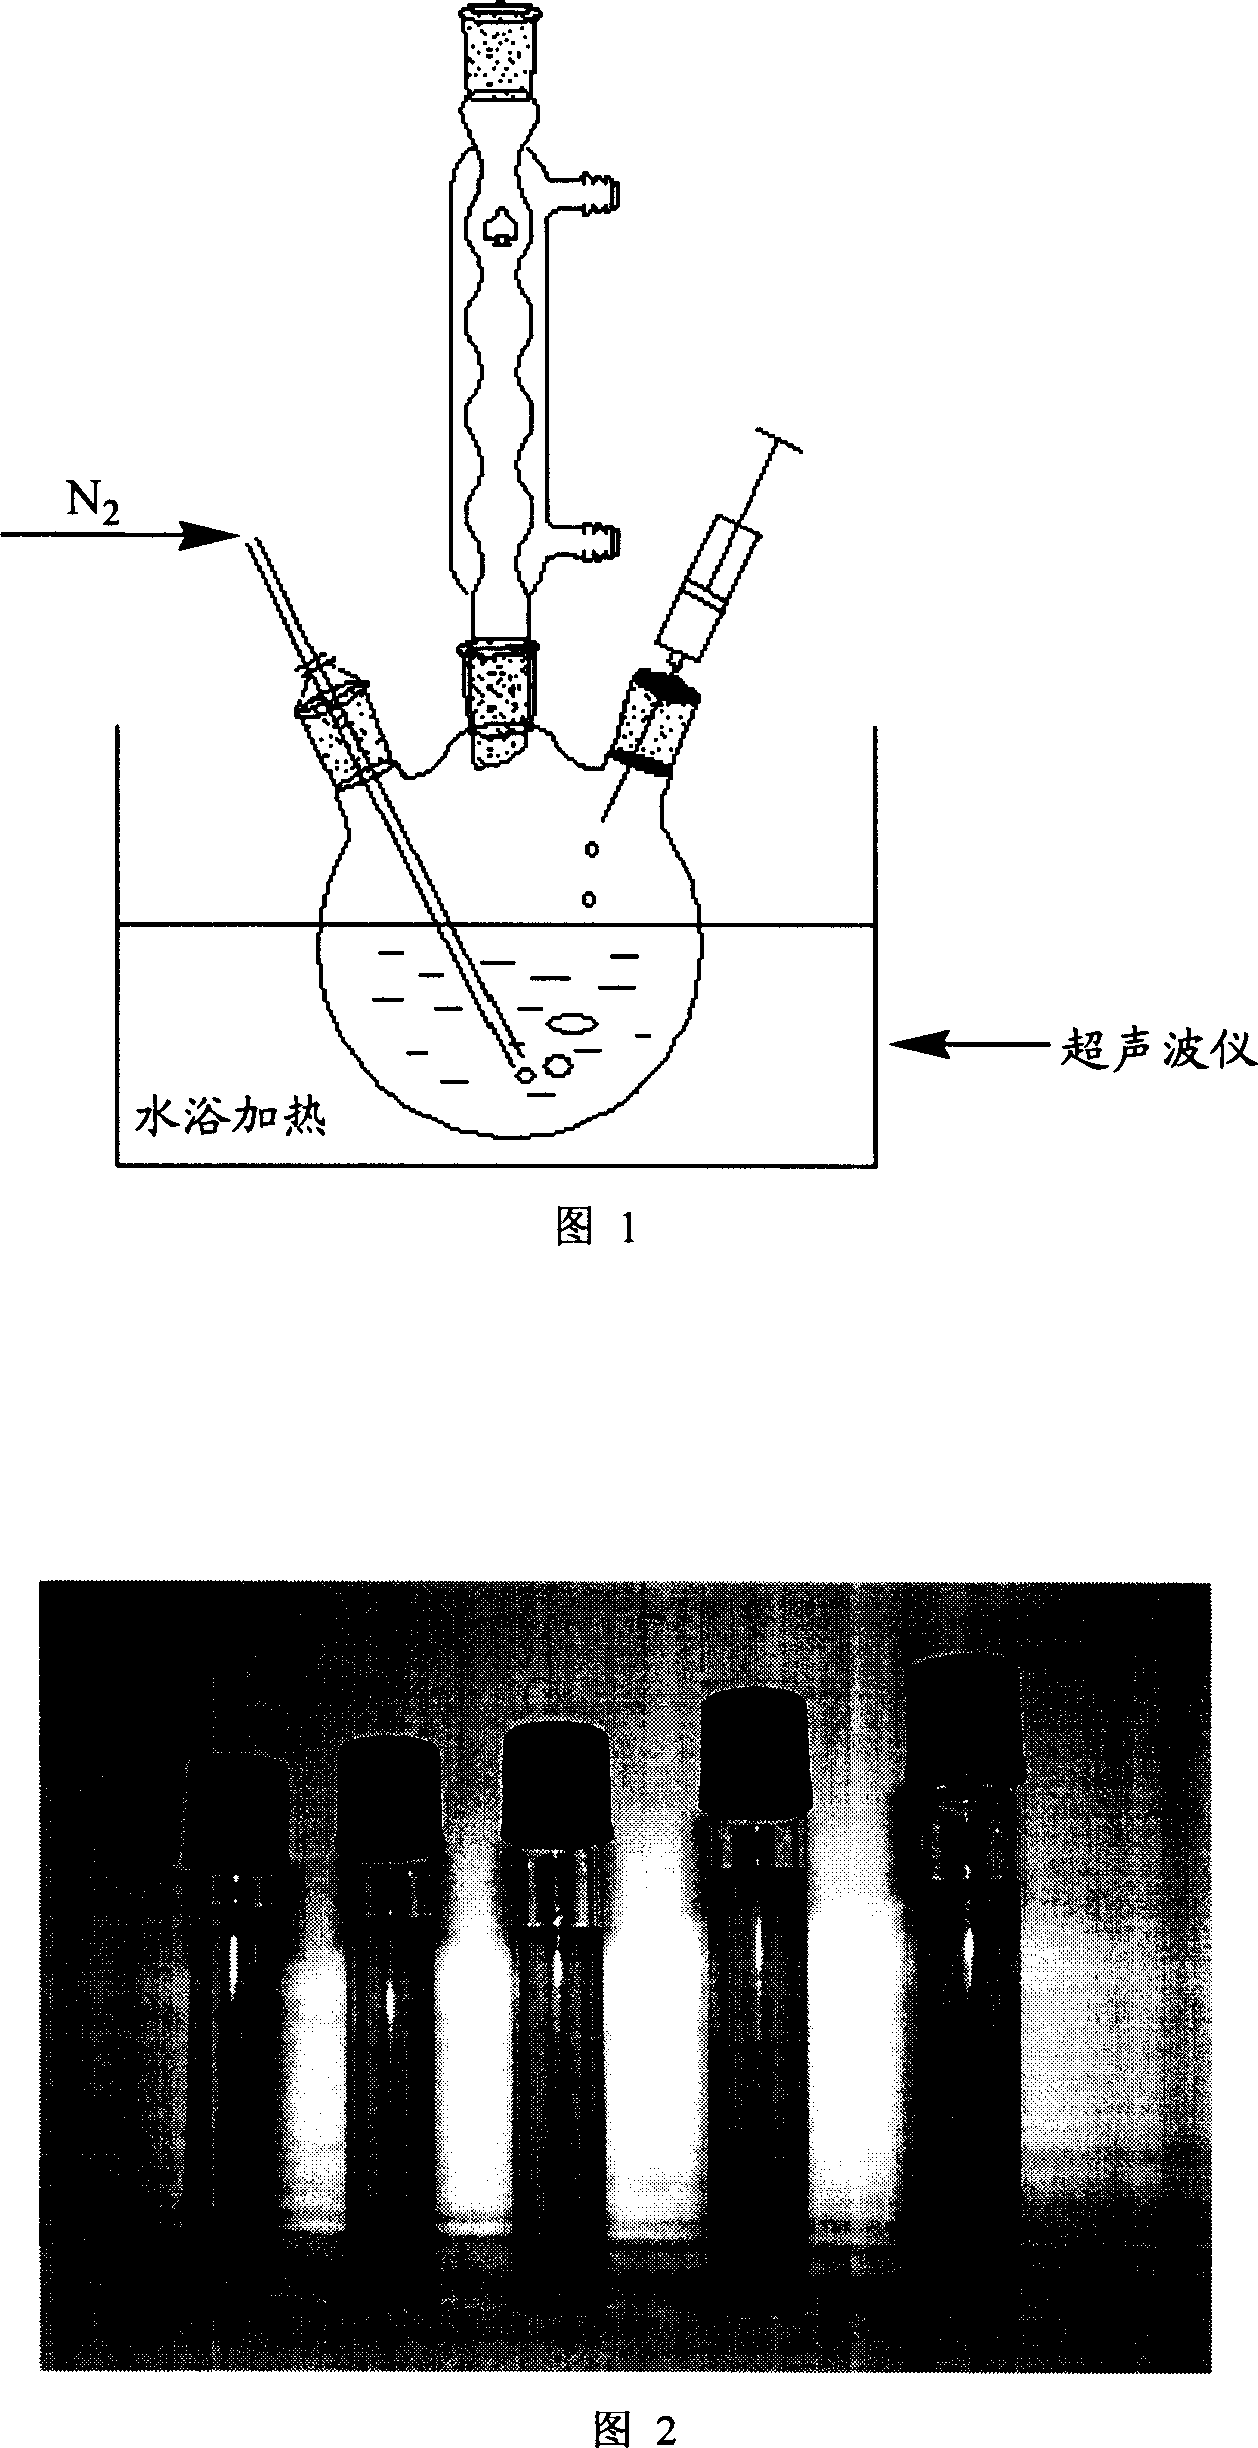 Method for preparing small-particle-size water-soluble cadium selenide quantum dot and its use